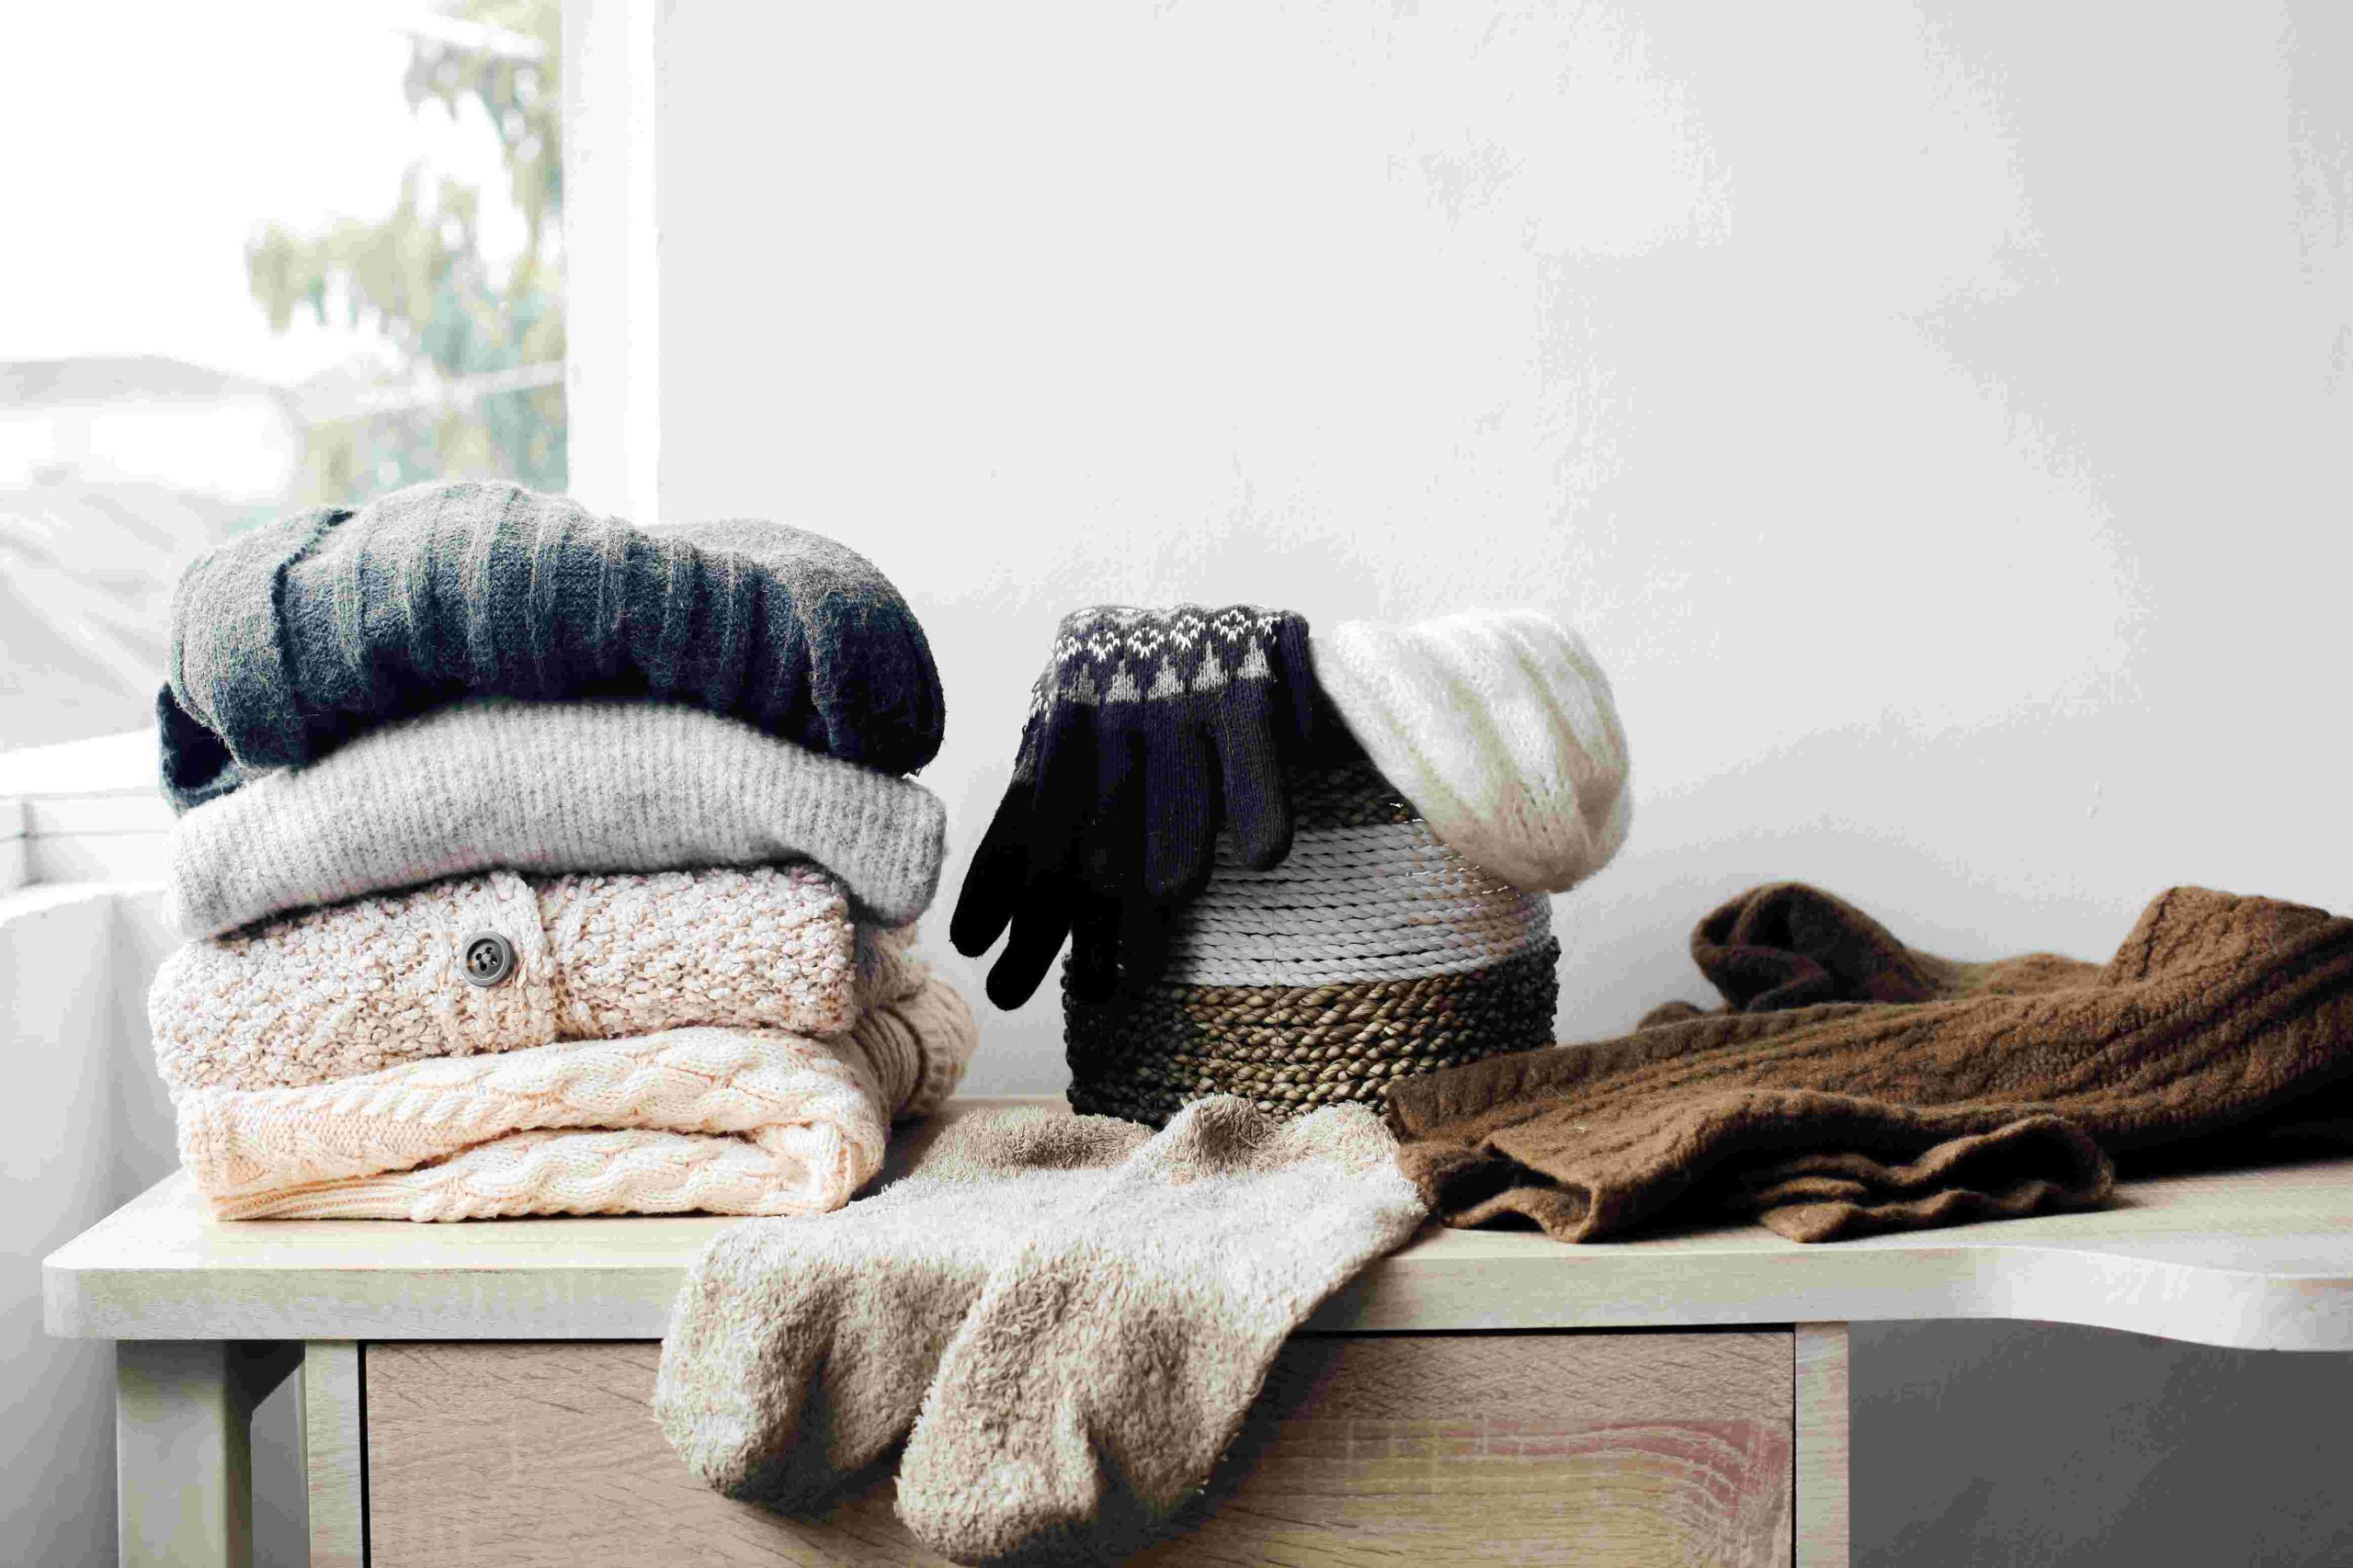 warm clothes folded on top of a dresser